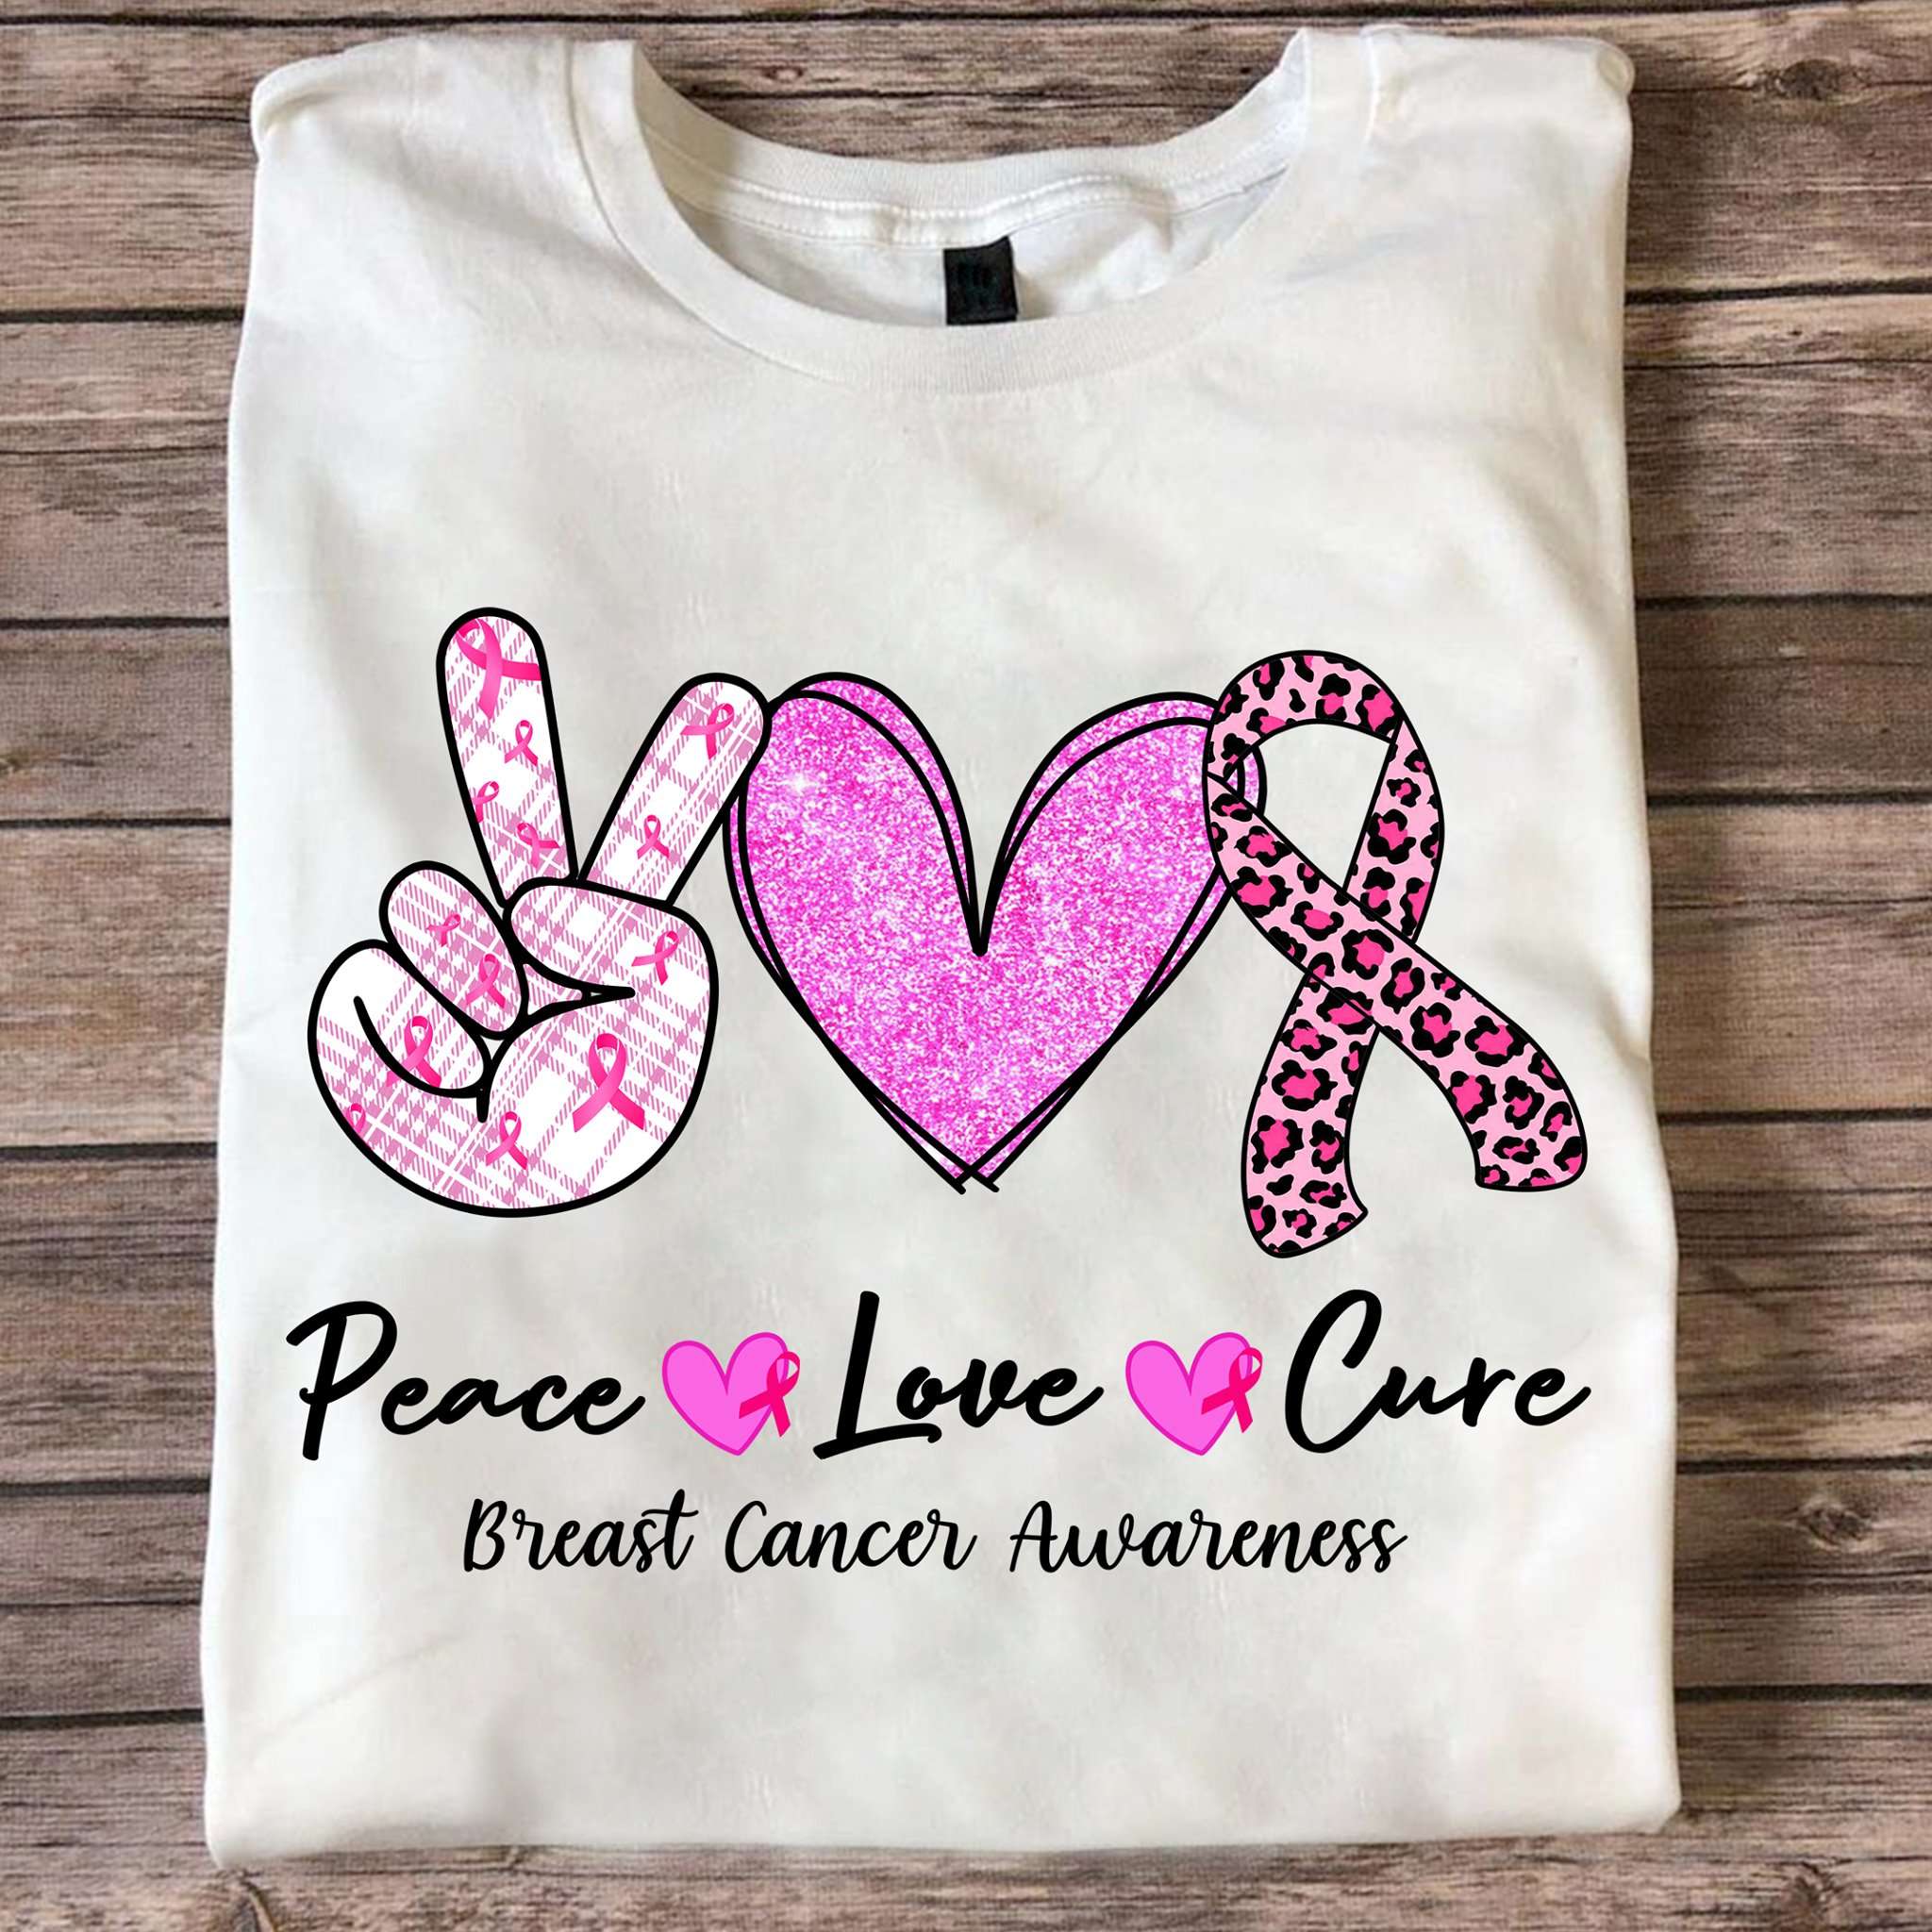 Peace love cure - Hope for a cure, breast cancer awareness